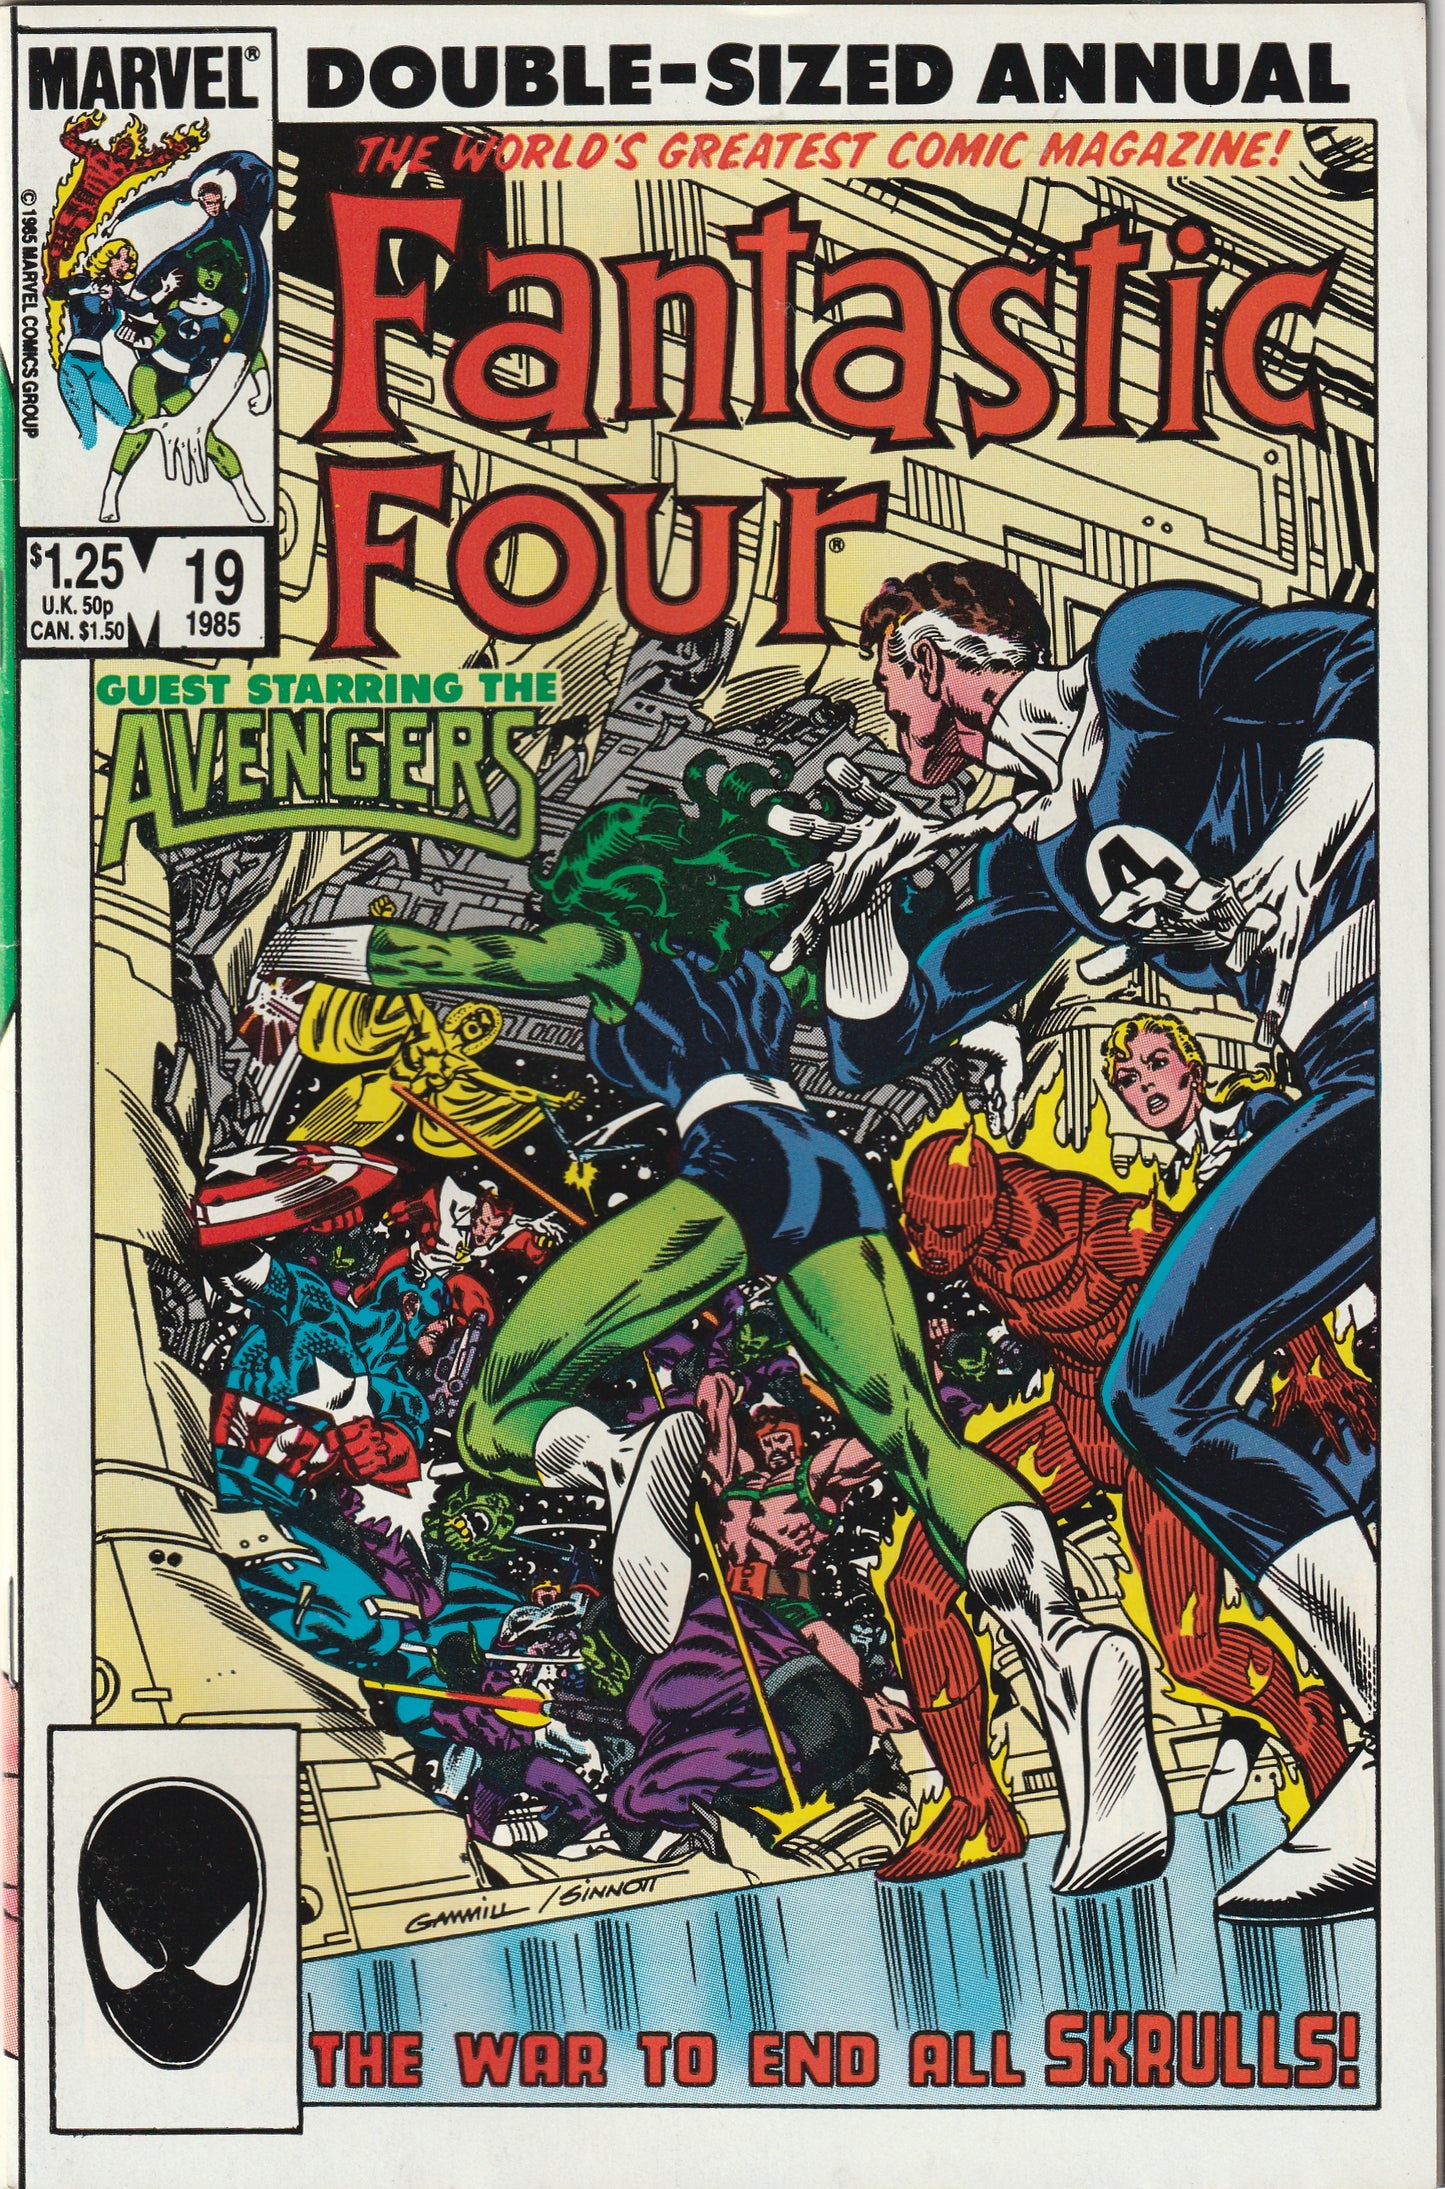 Fantastic Four Annual #19 (1985) - with Avengers and She-Hulk & Skrulls